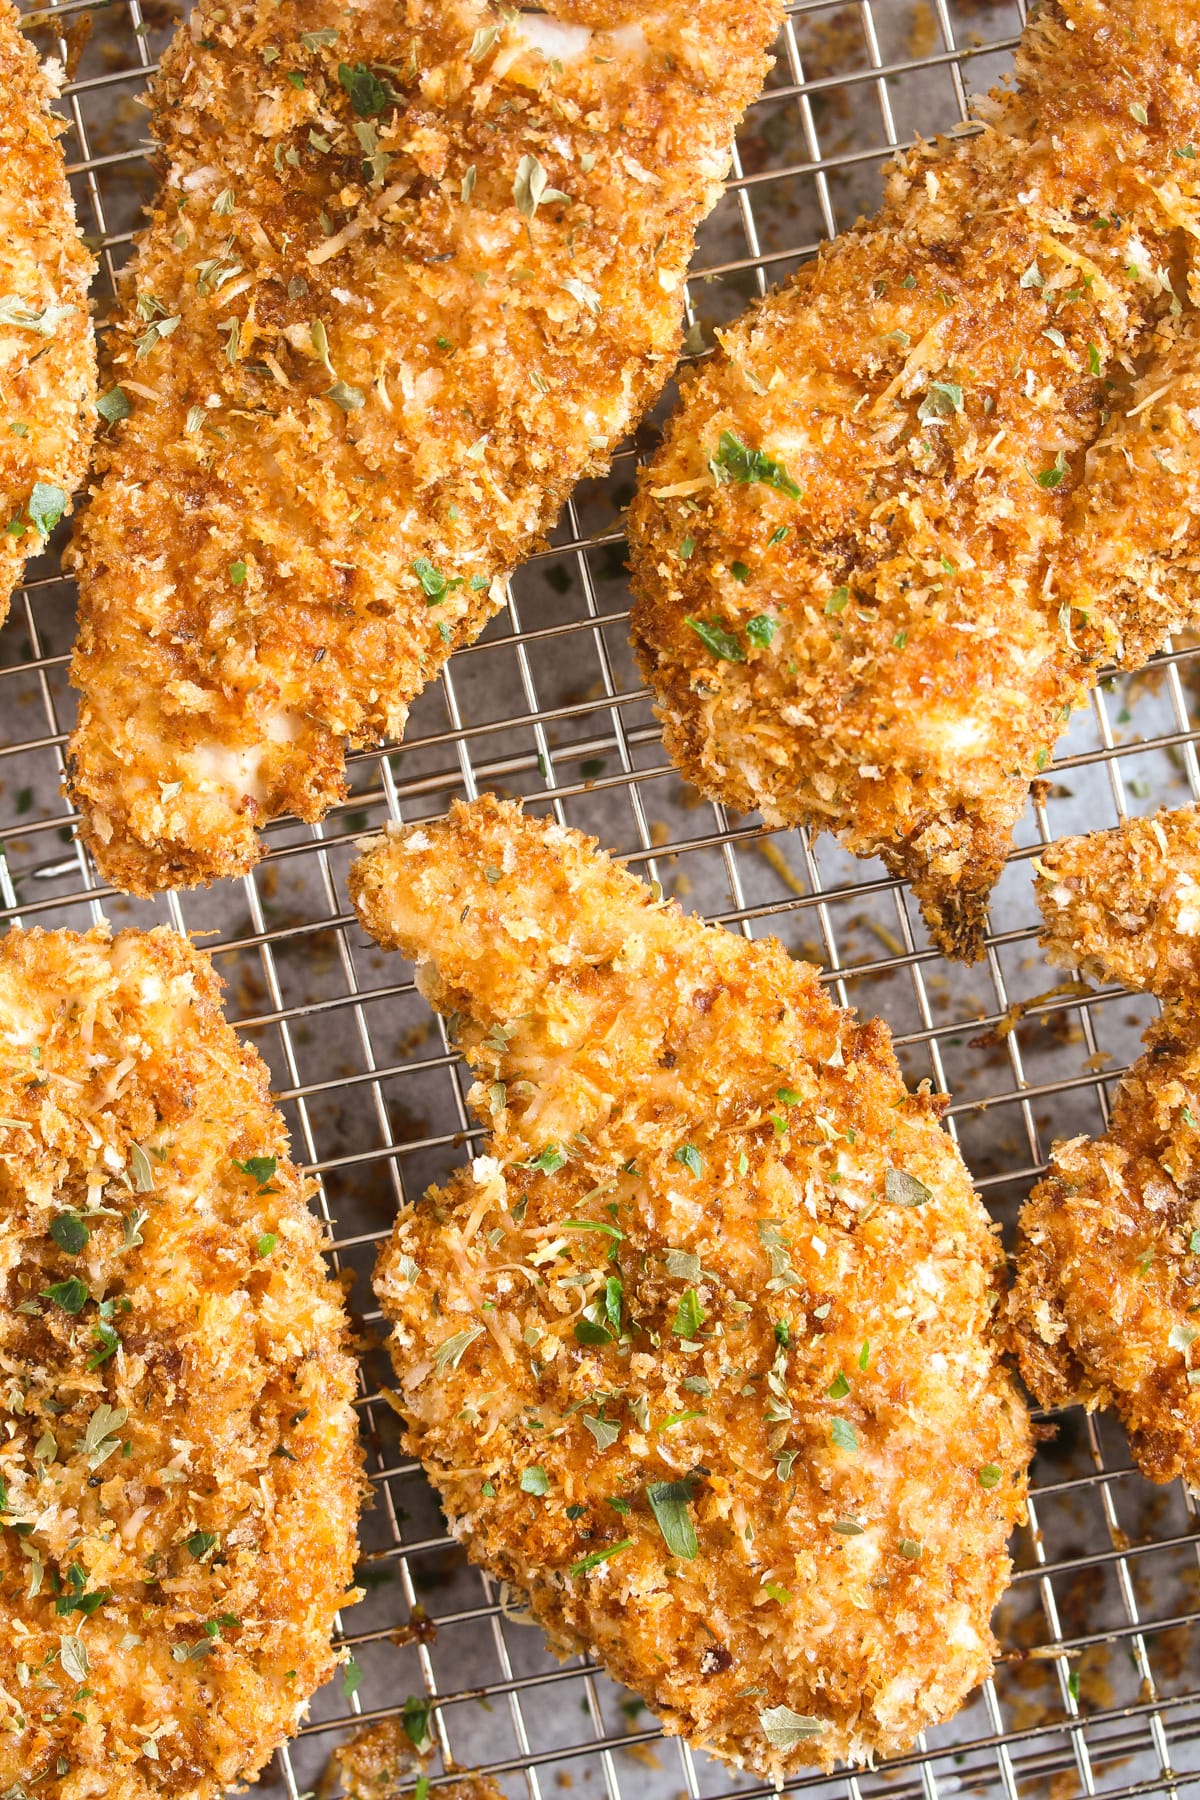 many golden panko chicken pieces on a wire rack.